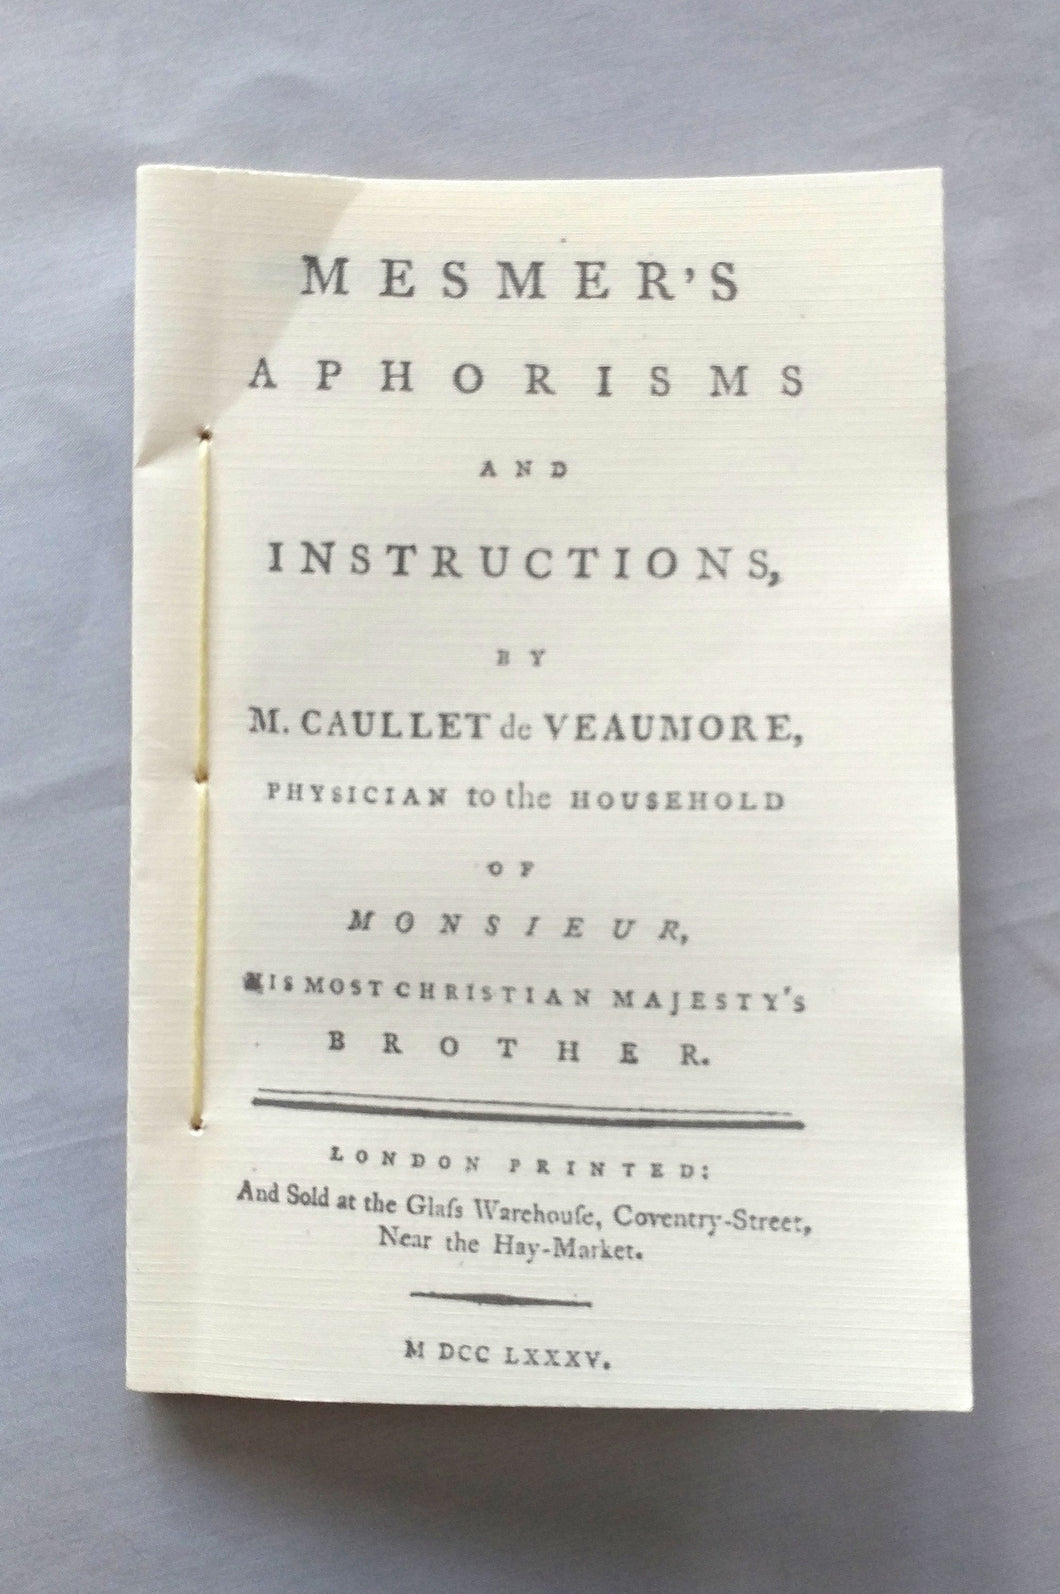 Mesmer's Aphorisms and Instructions